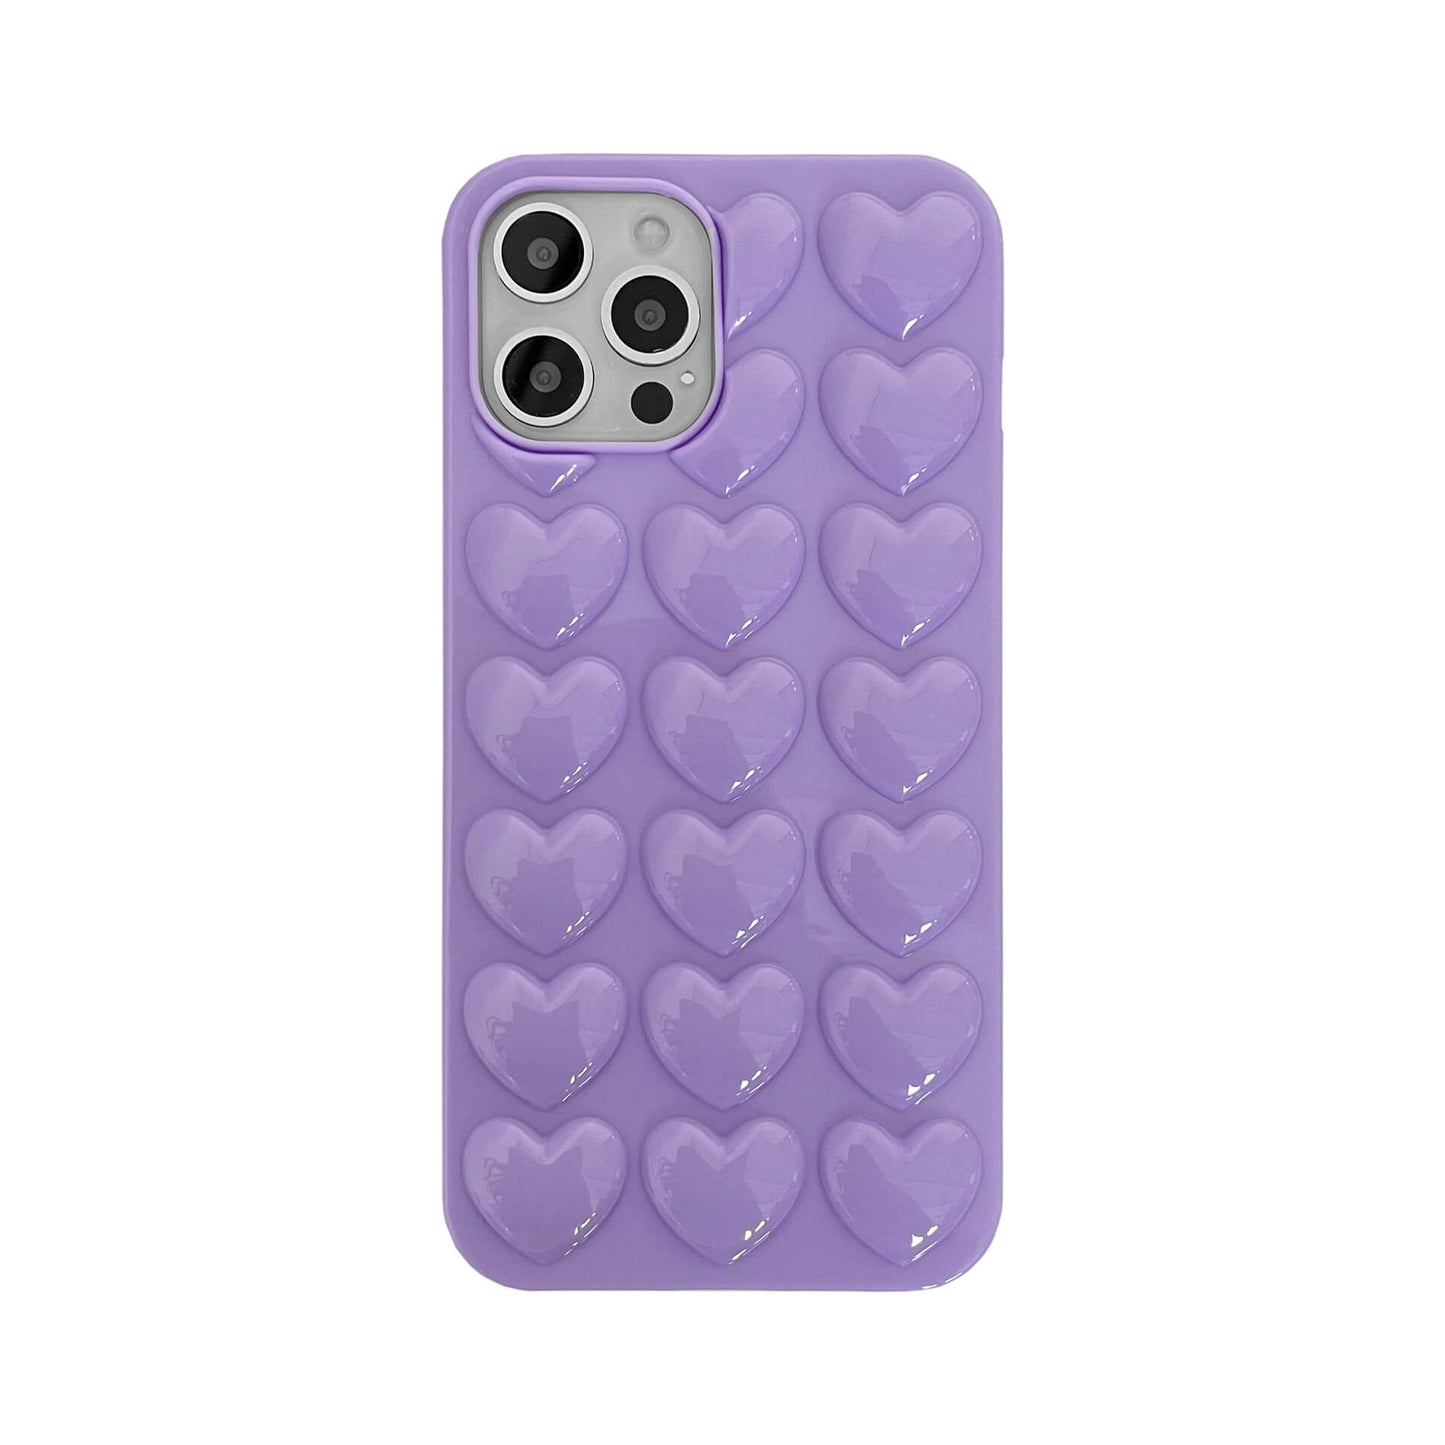 Coque et skin adhésive iPhone Candy Color 3D Love Heart Clear Silicone Couple